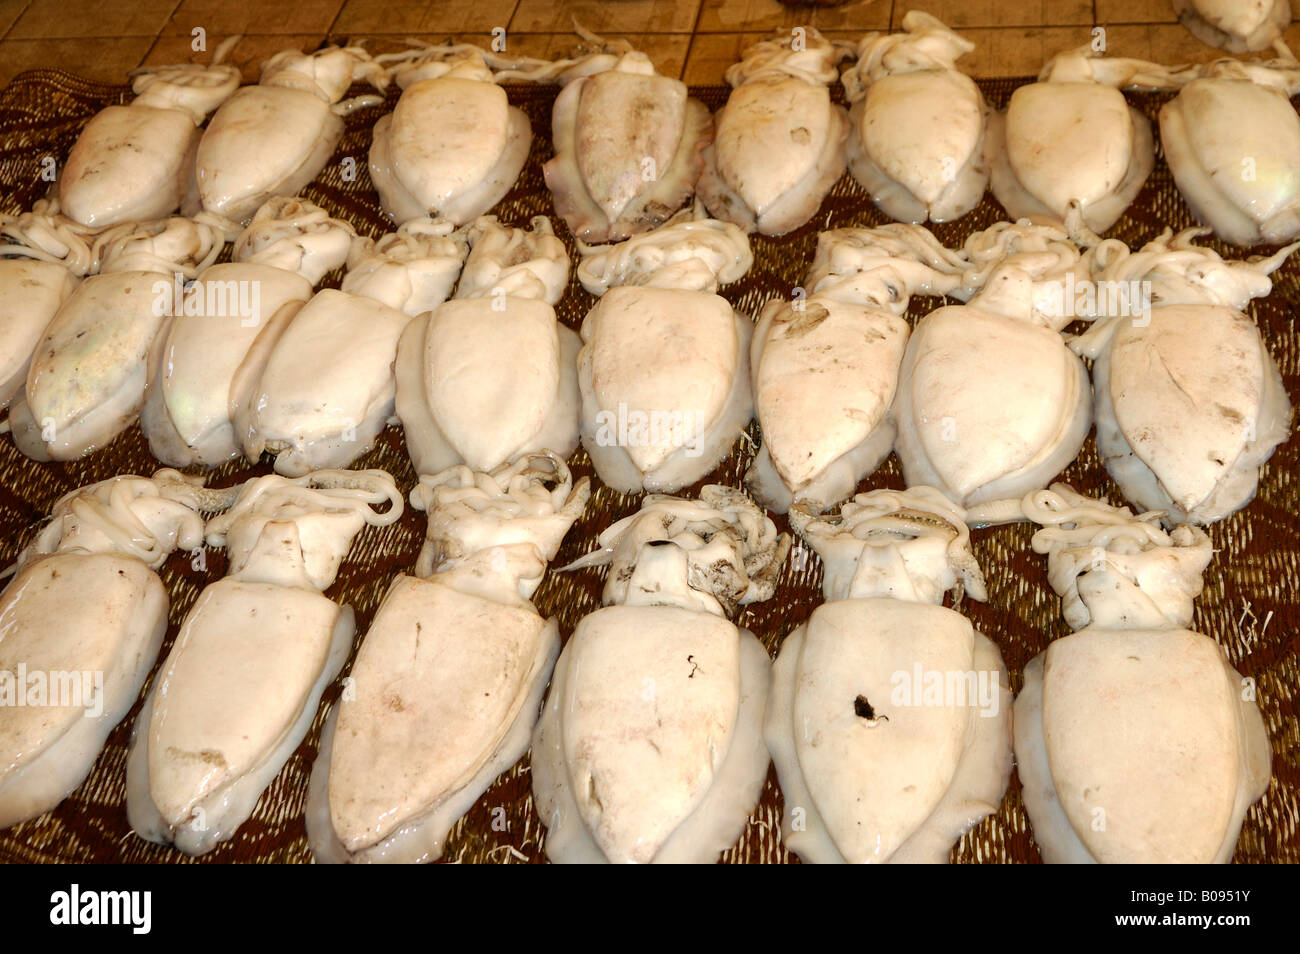 Cuttlefish laid in rows at the Muttrah fish market, Muscat, Sultanate of Oman, Middle East Stock Photo